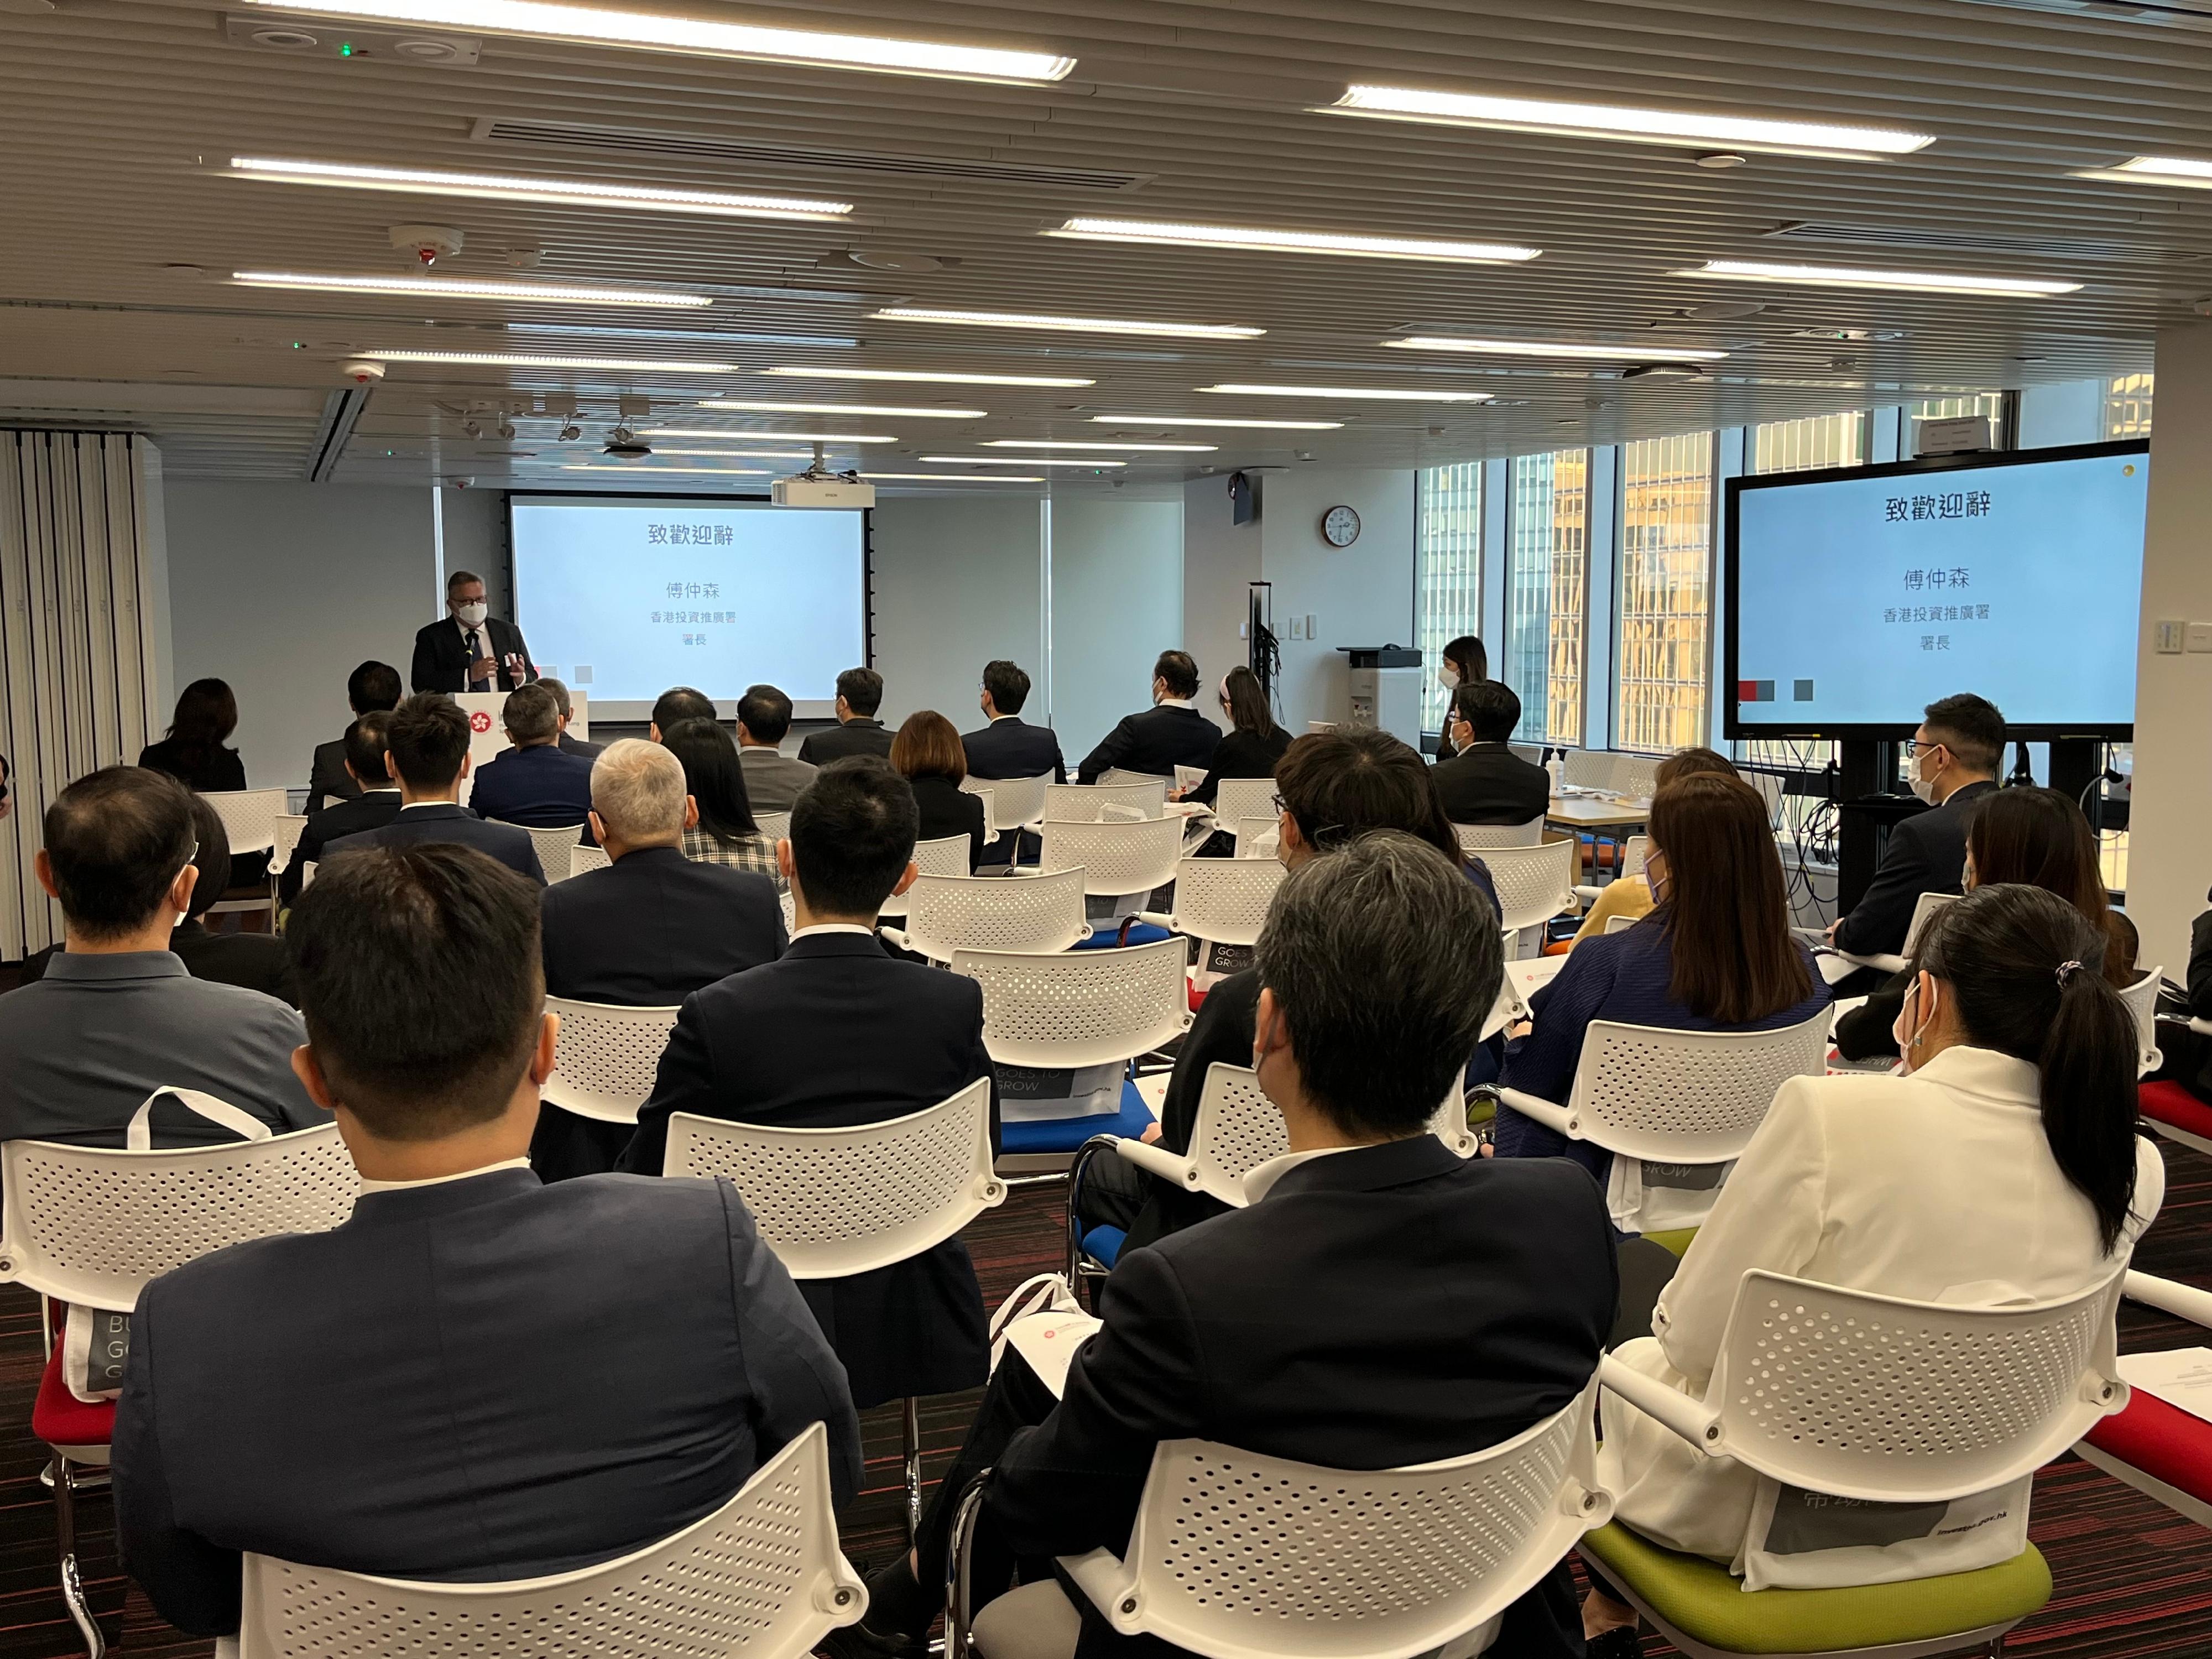 Invest Hong Kong and the Chinese Banking Association of Hong Kong today (October 11) held a seminar for members of the Chinese banking industry in Hong Kong, encouraging them to leverage the city's business advantages to embrace the new opportunities in the family office and fintech sectors.